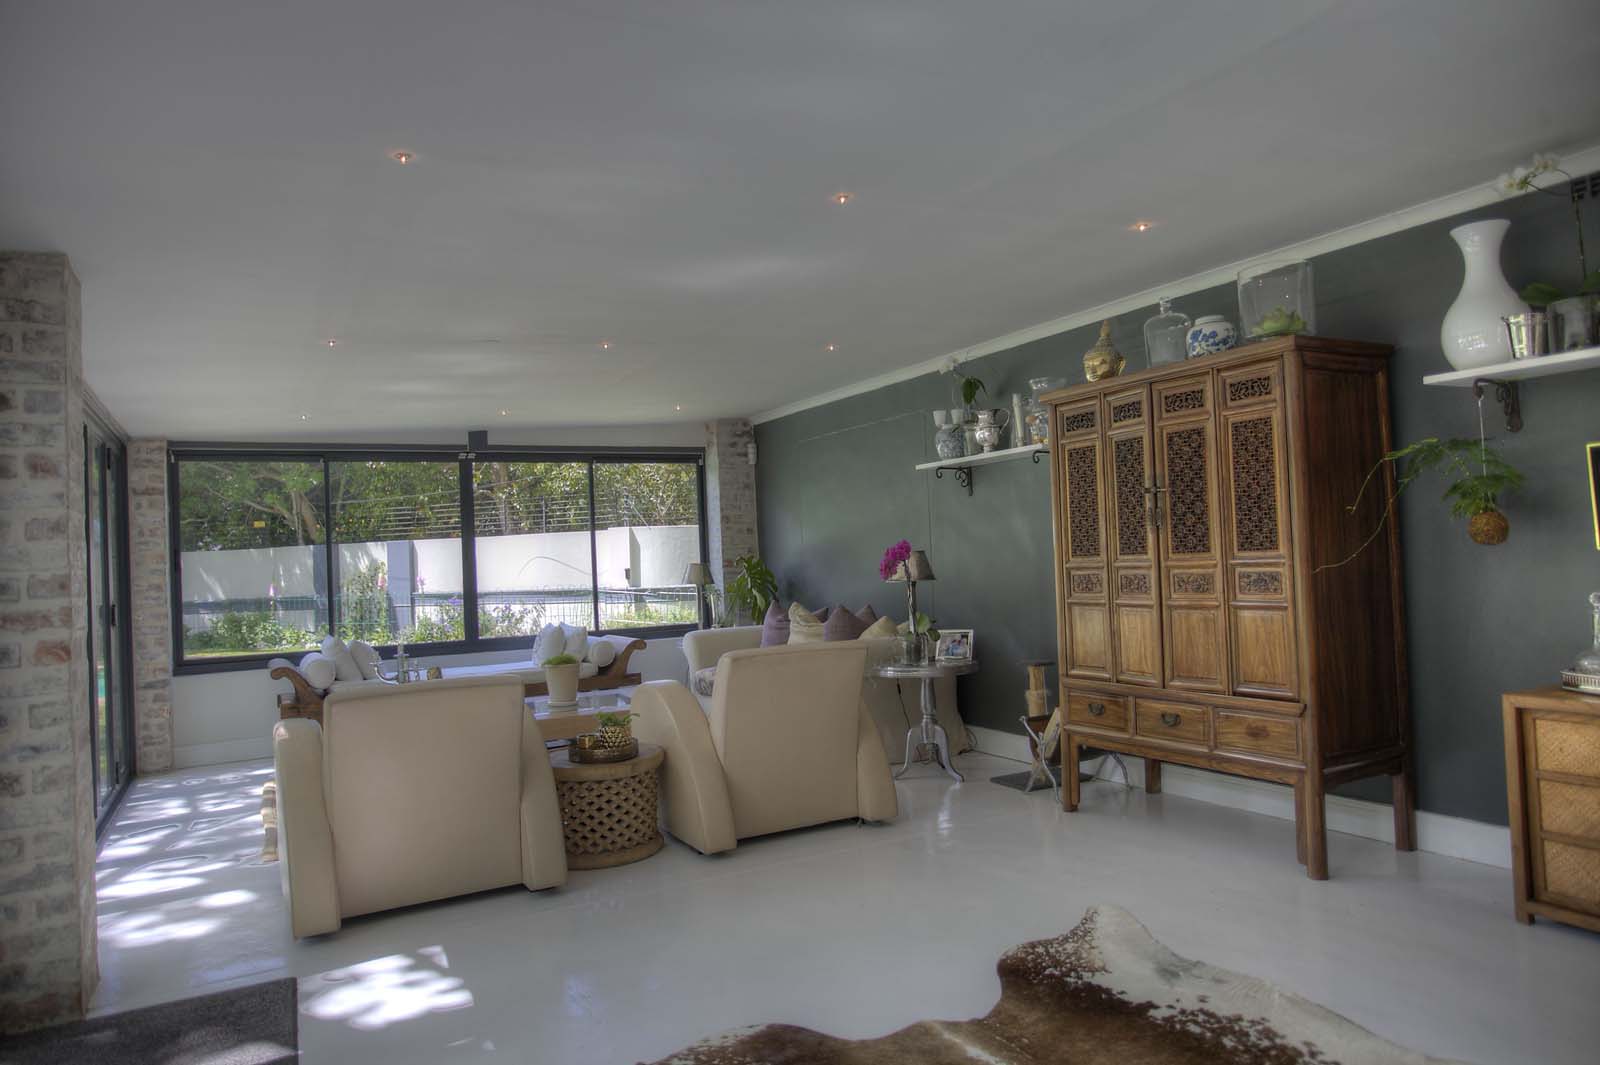 Photo 14 of Villa Robertson accommodation in Constantia, Cape Town with 4 bedrooms and 3 bathrooms